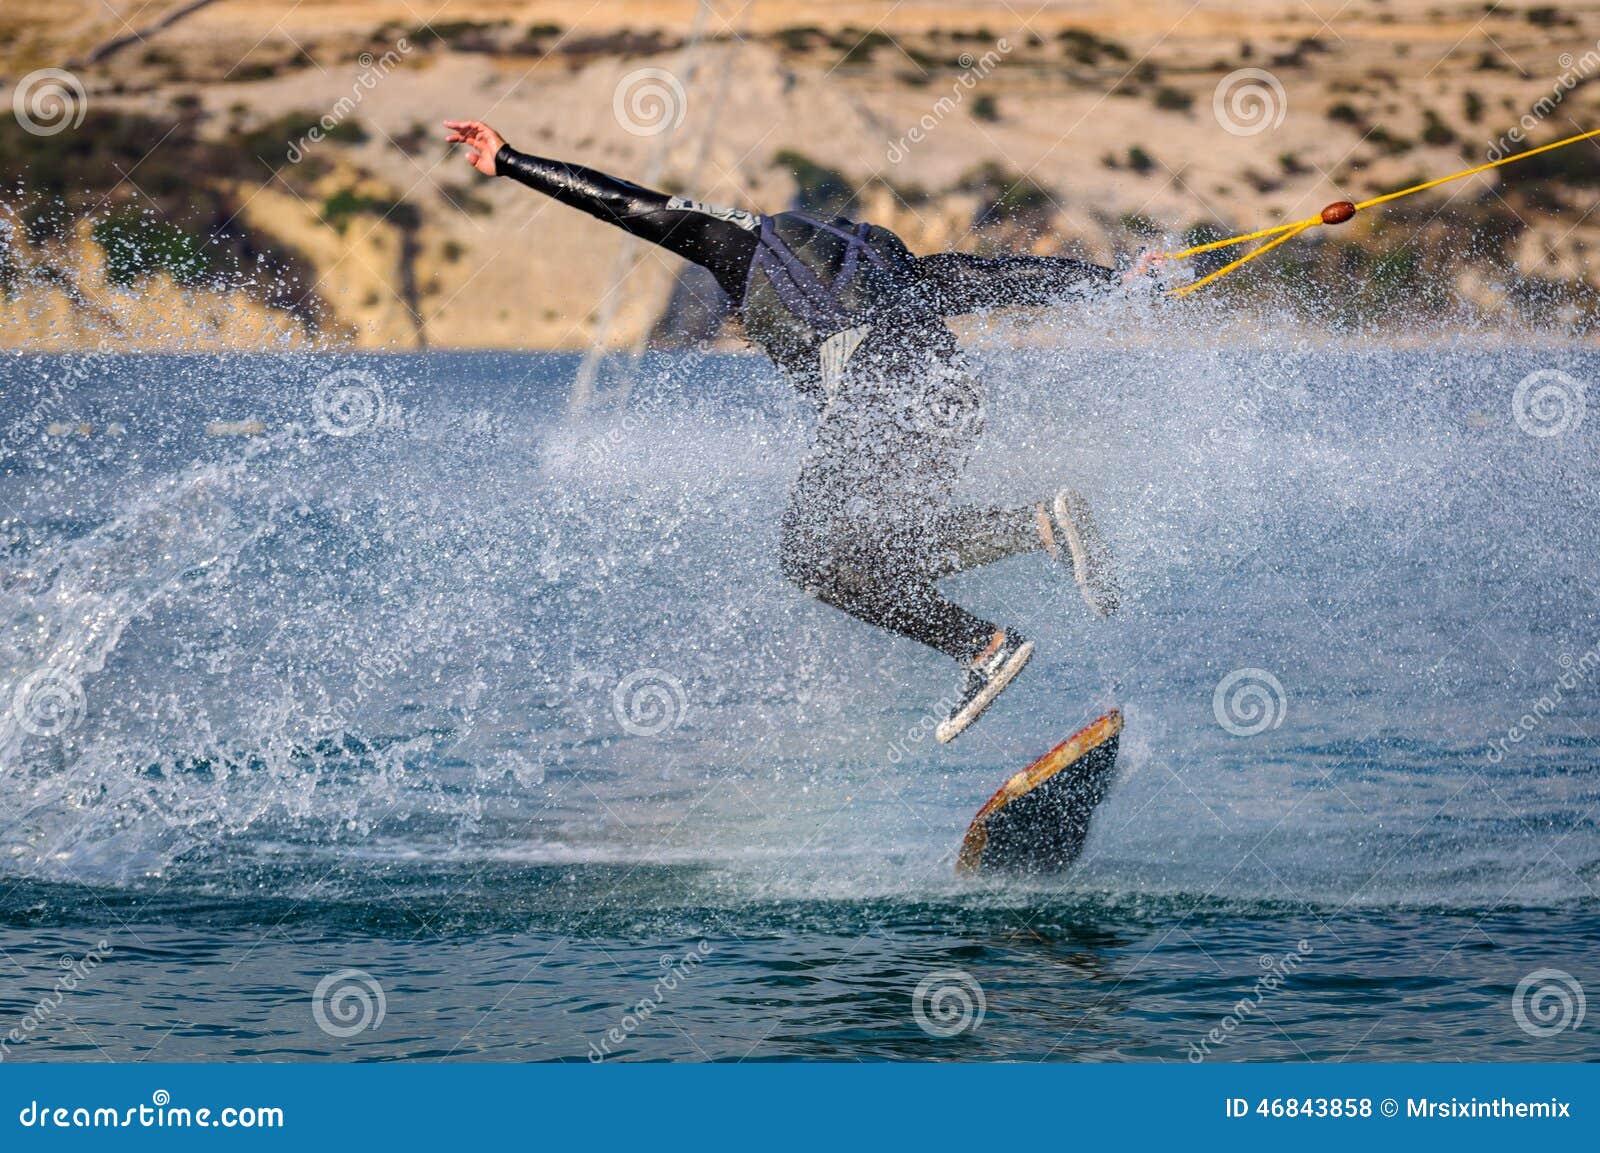 wakeskater in a cable park doing tricks